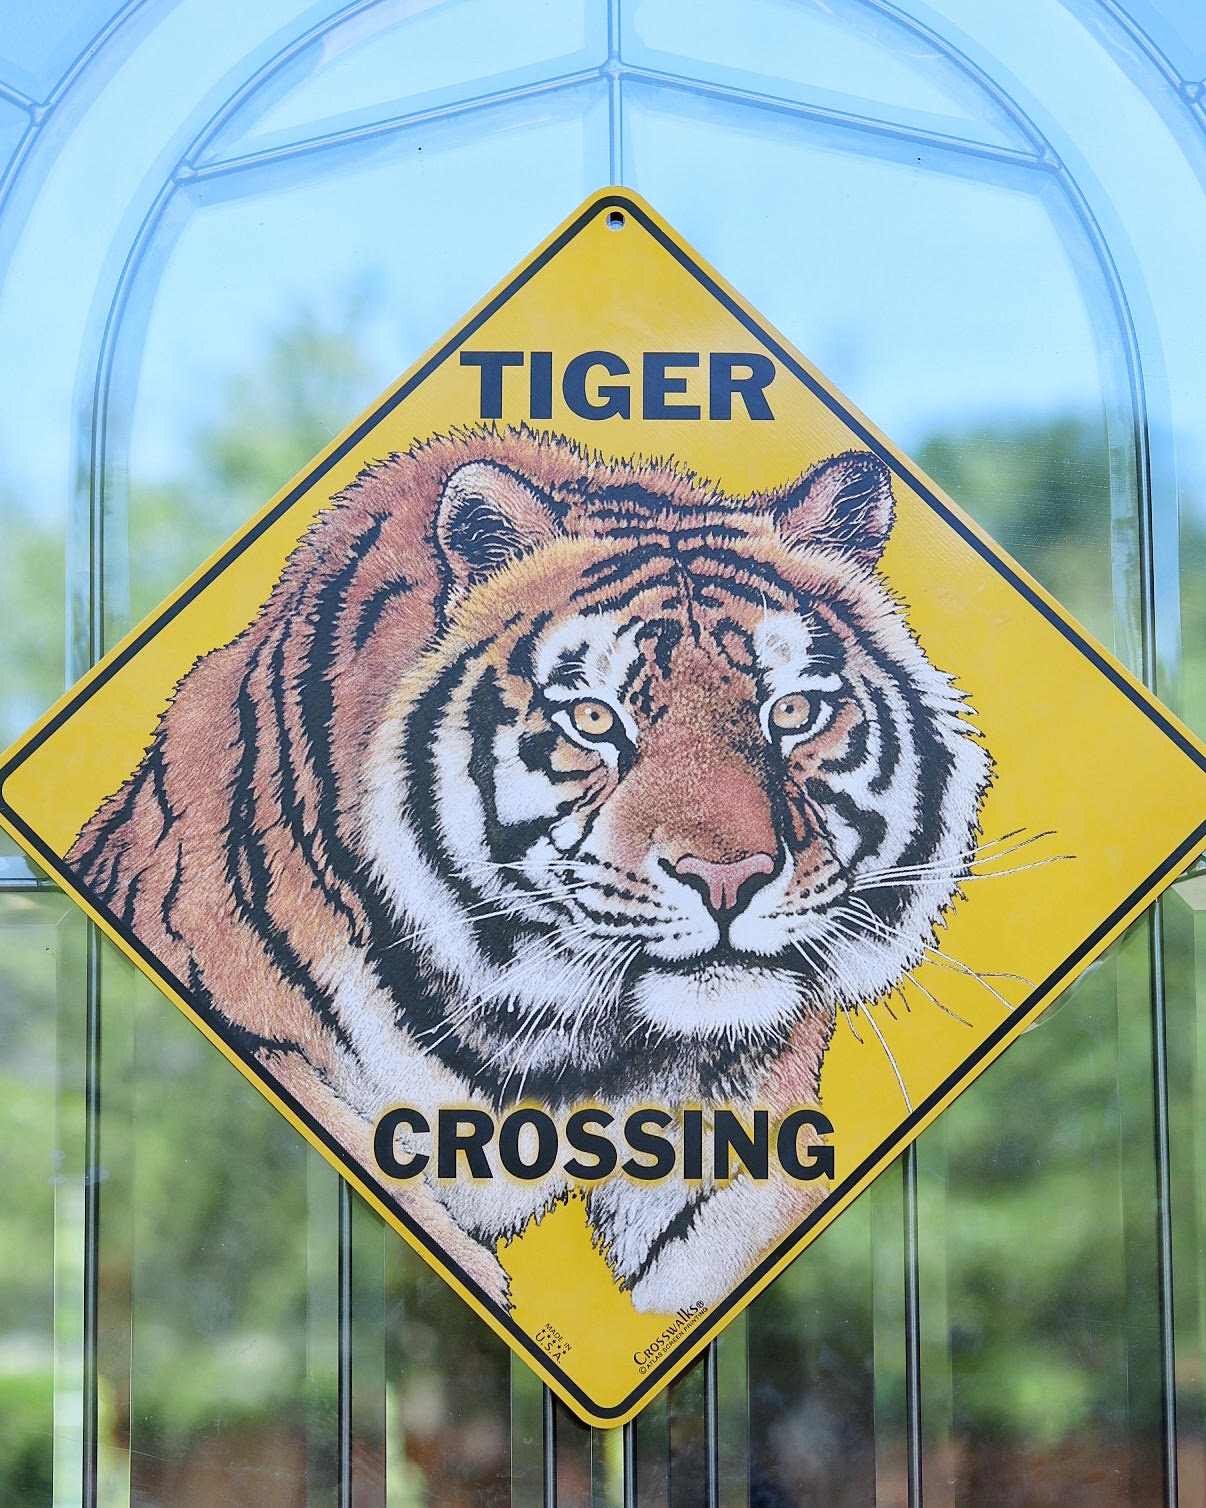 tiger crossing sign as decor for a tiger themed birthday party